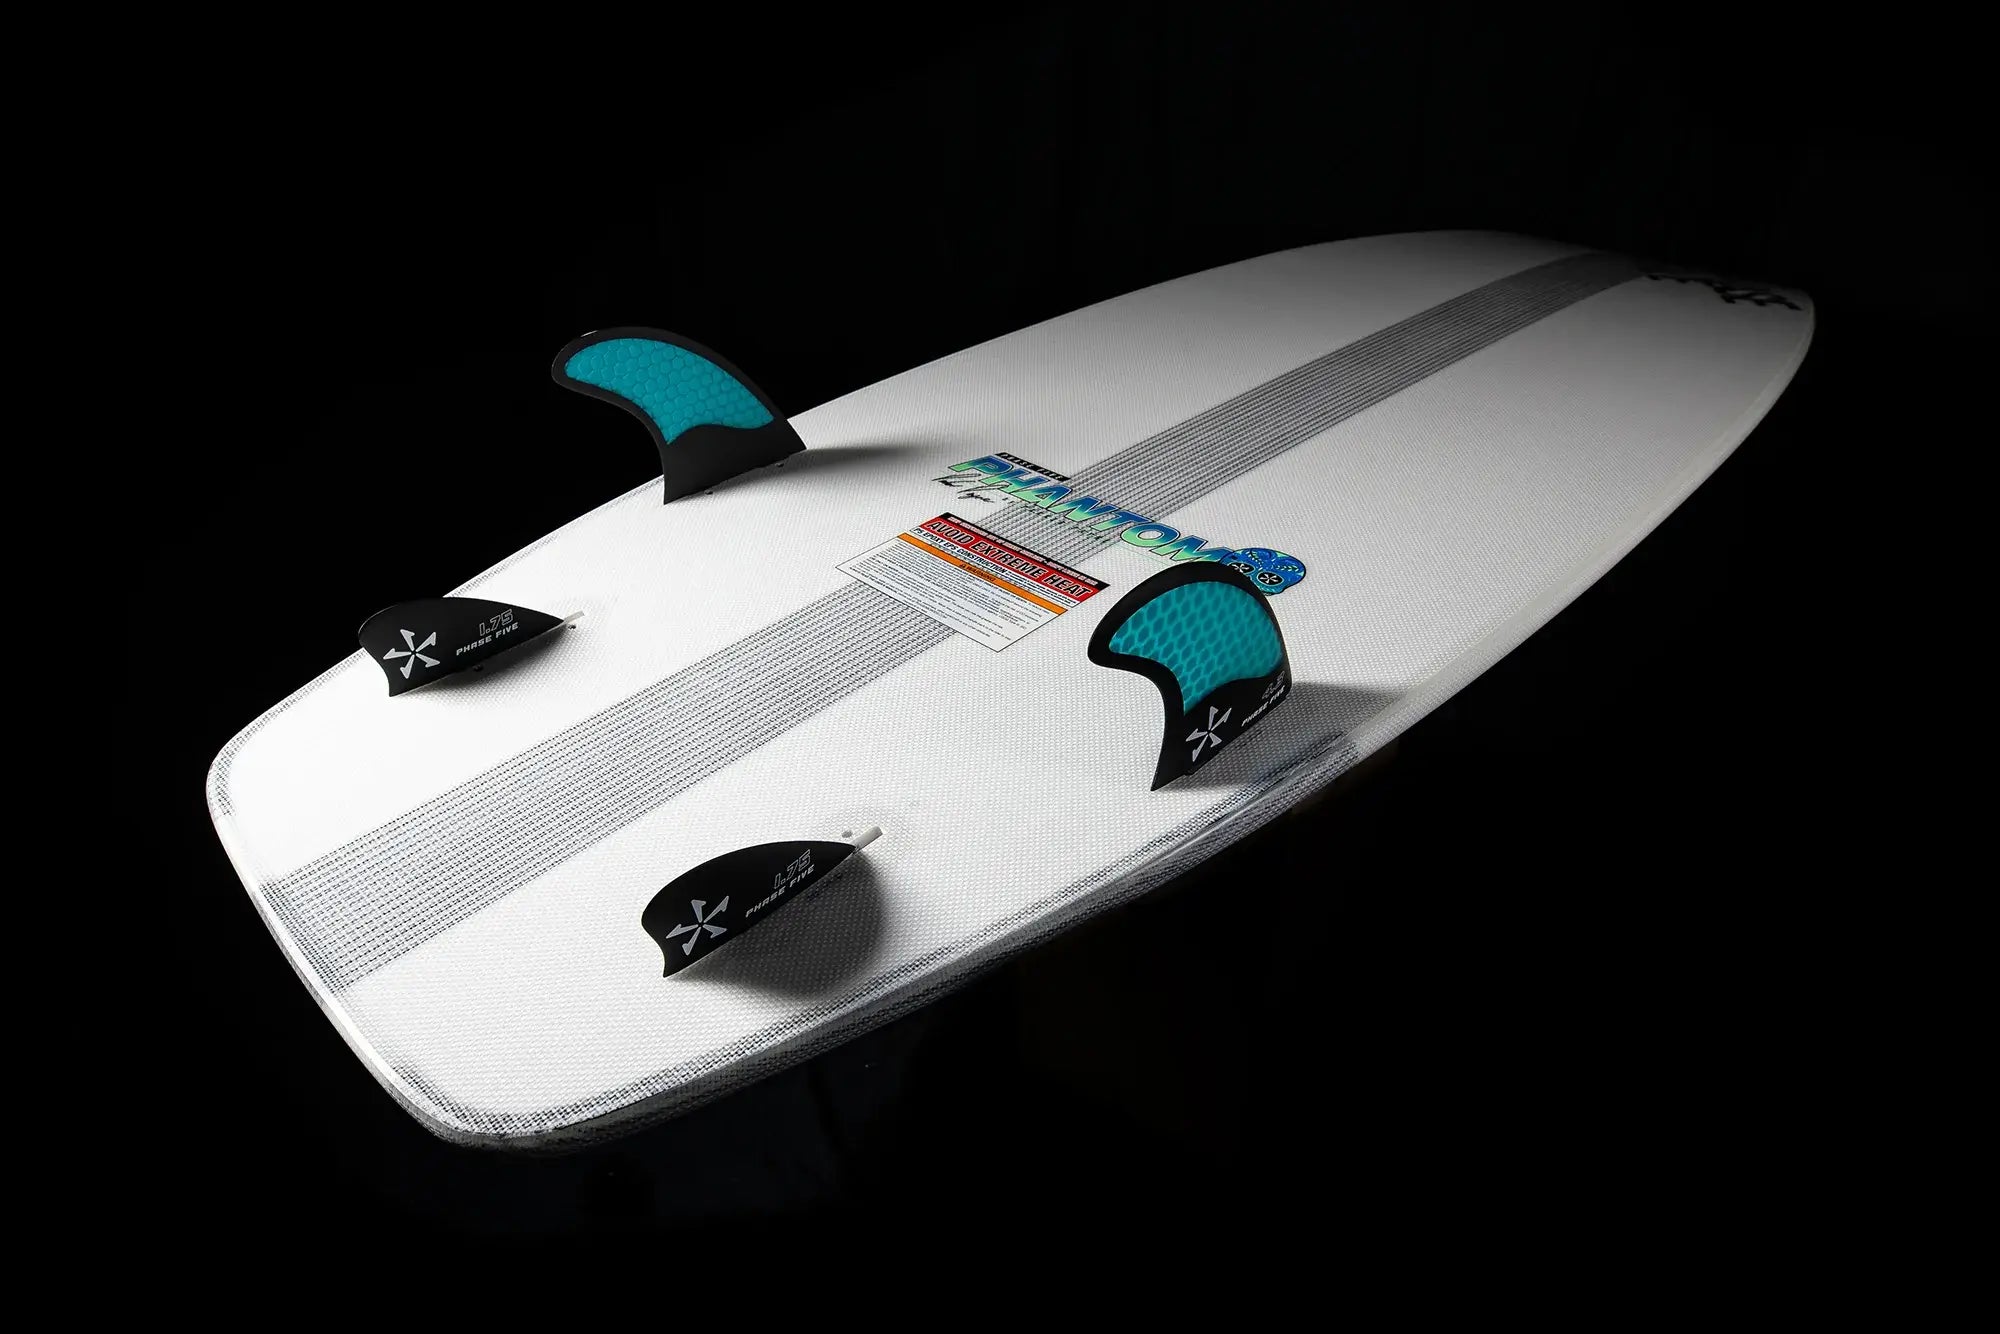 A white Phase 5 surfboard with two Phase 5 Phantom fins, designed by Parker Payne.